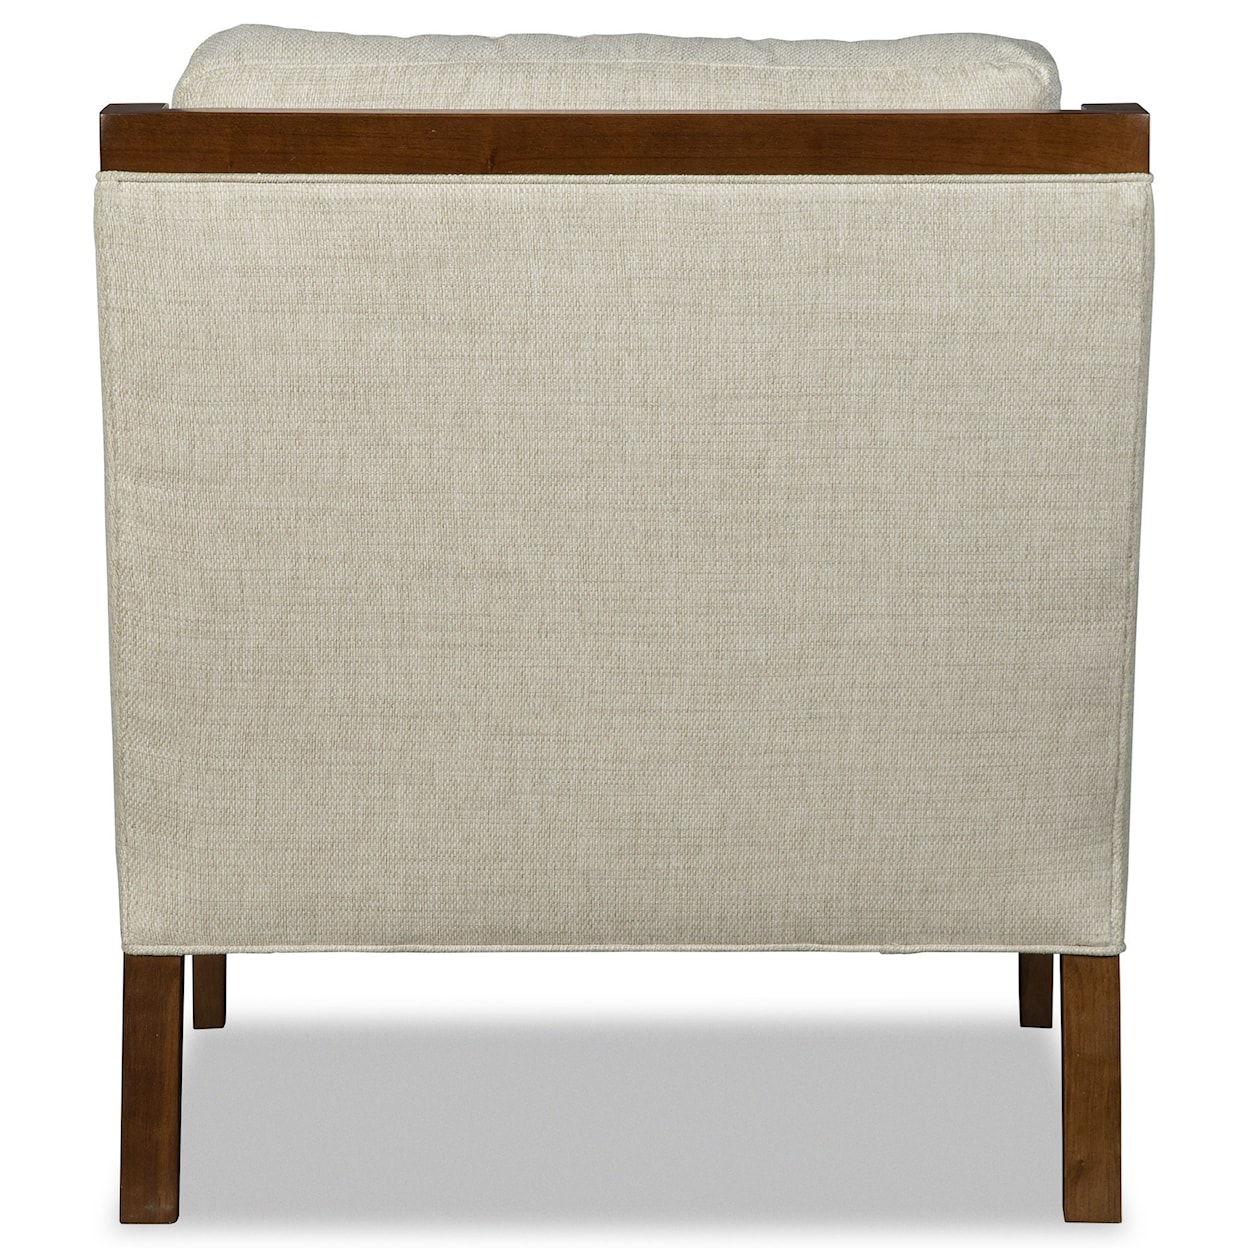 Craftmaster 002910BD Wood Accent Chair